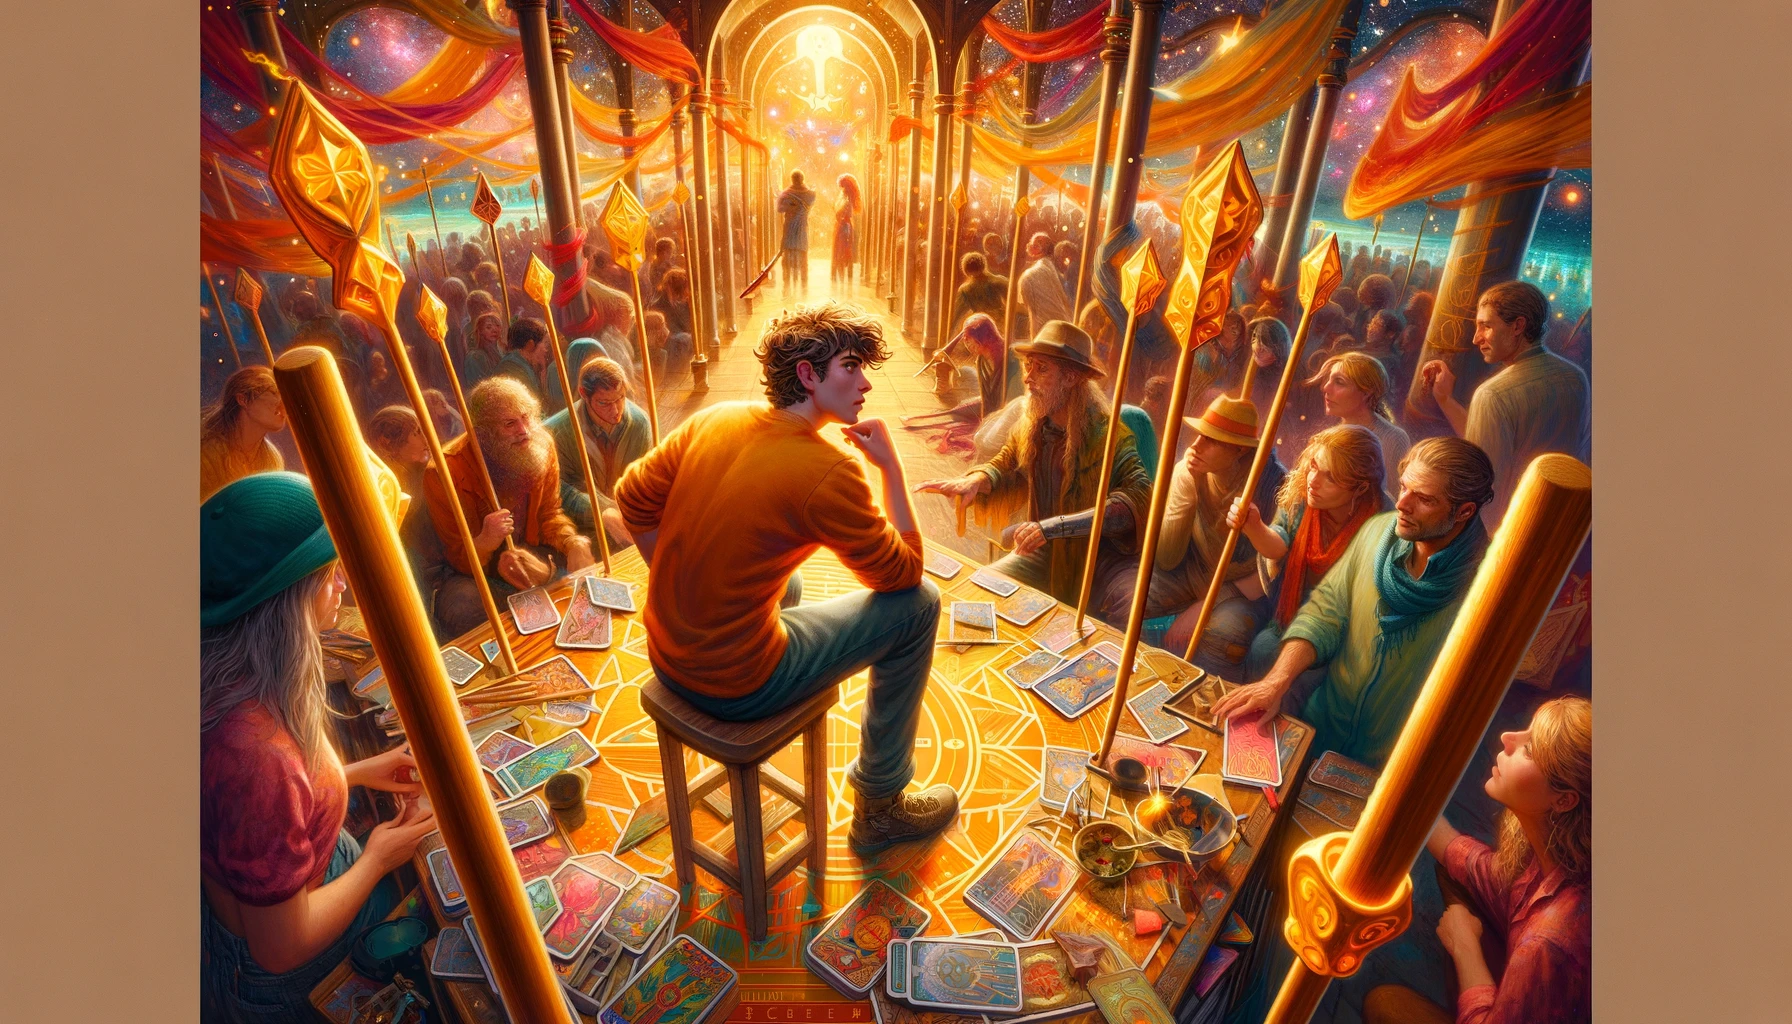 An image illustrating an individual's passion for challenge and personal growth, showing lively interaction and dynamic energy in overcoming obstacles. The backdrop is filled with vibrant movement and engagement, capturing the essence of the Five of Wands tarot card.